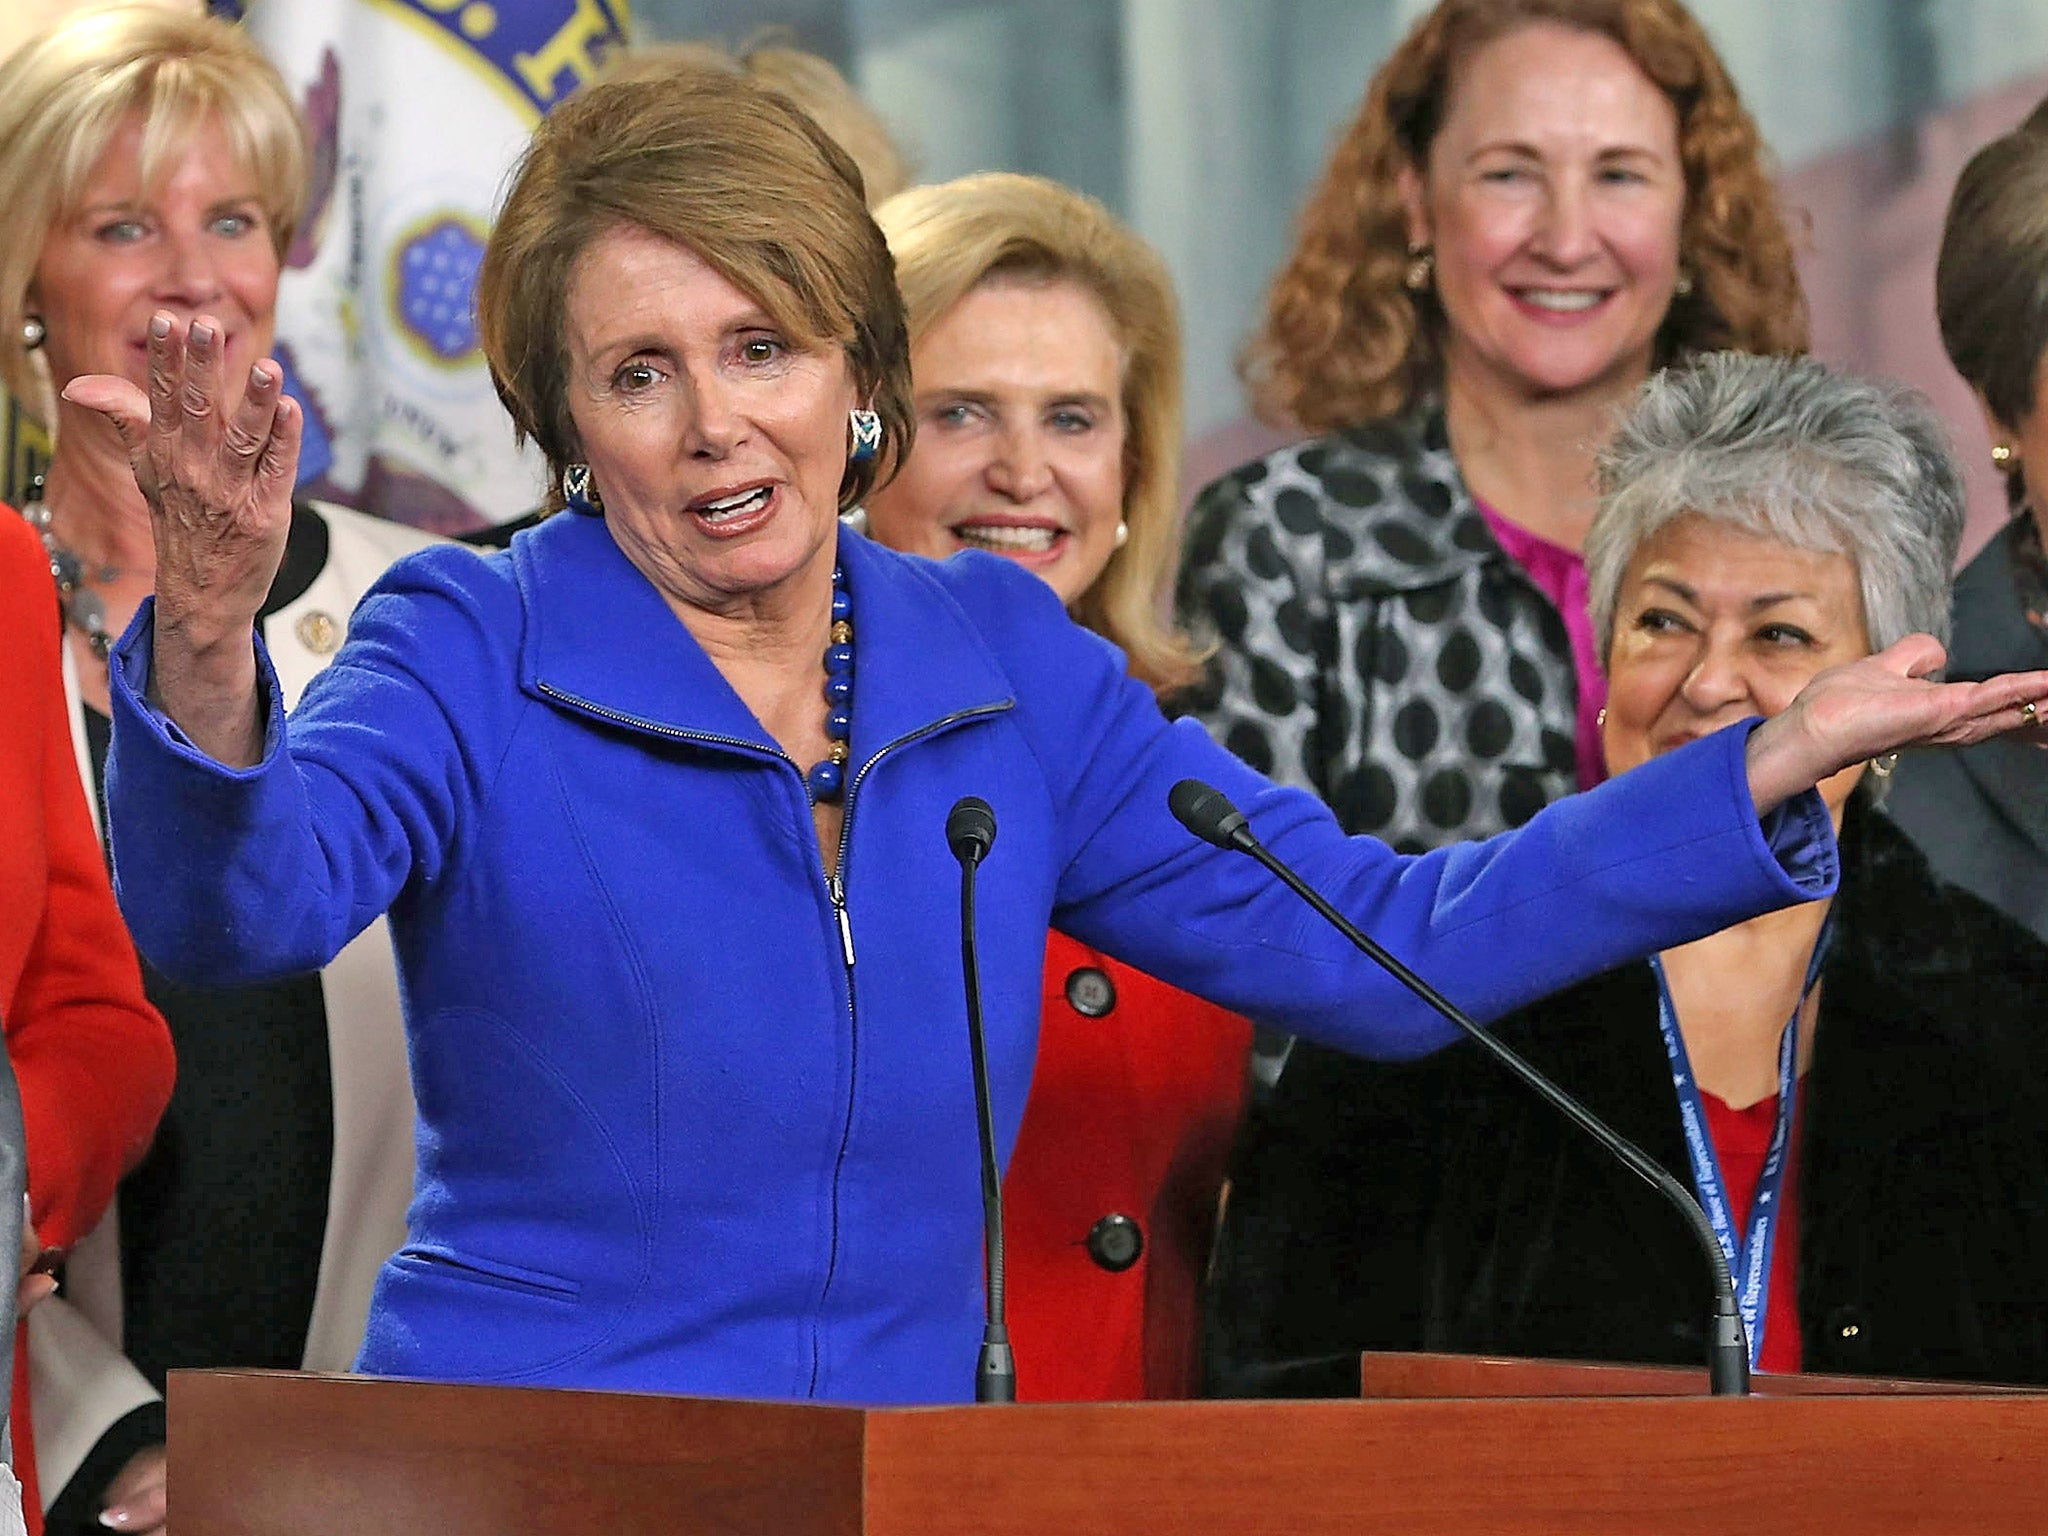 Nancy Pelosi is likely to resist cuts to social programmes